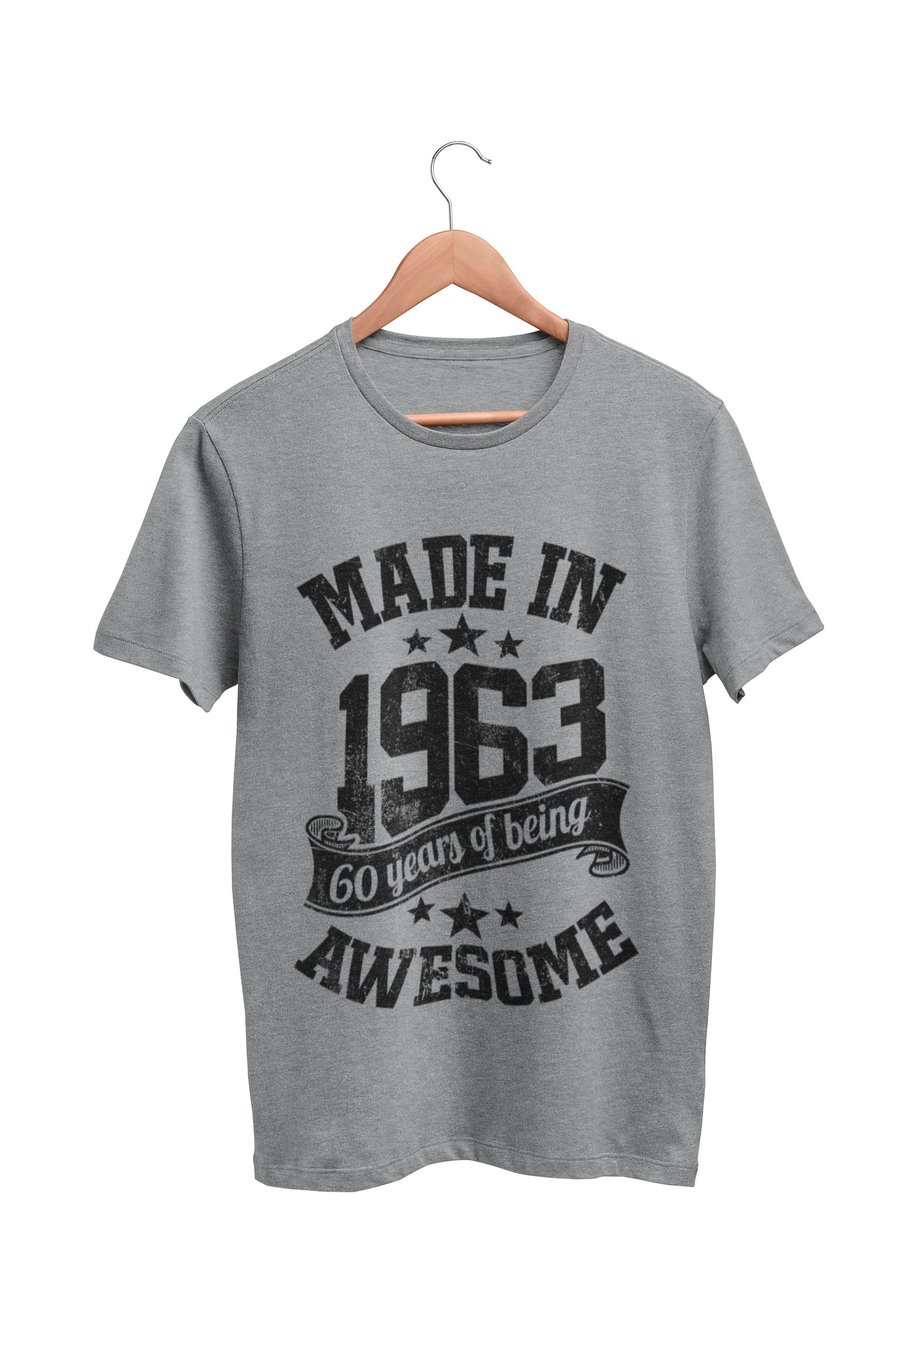 Funny 60th Birthday T Shirt 2023 Shirt Made In 1963 60 Years Of Being Awesome si